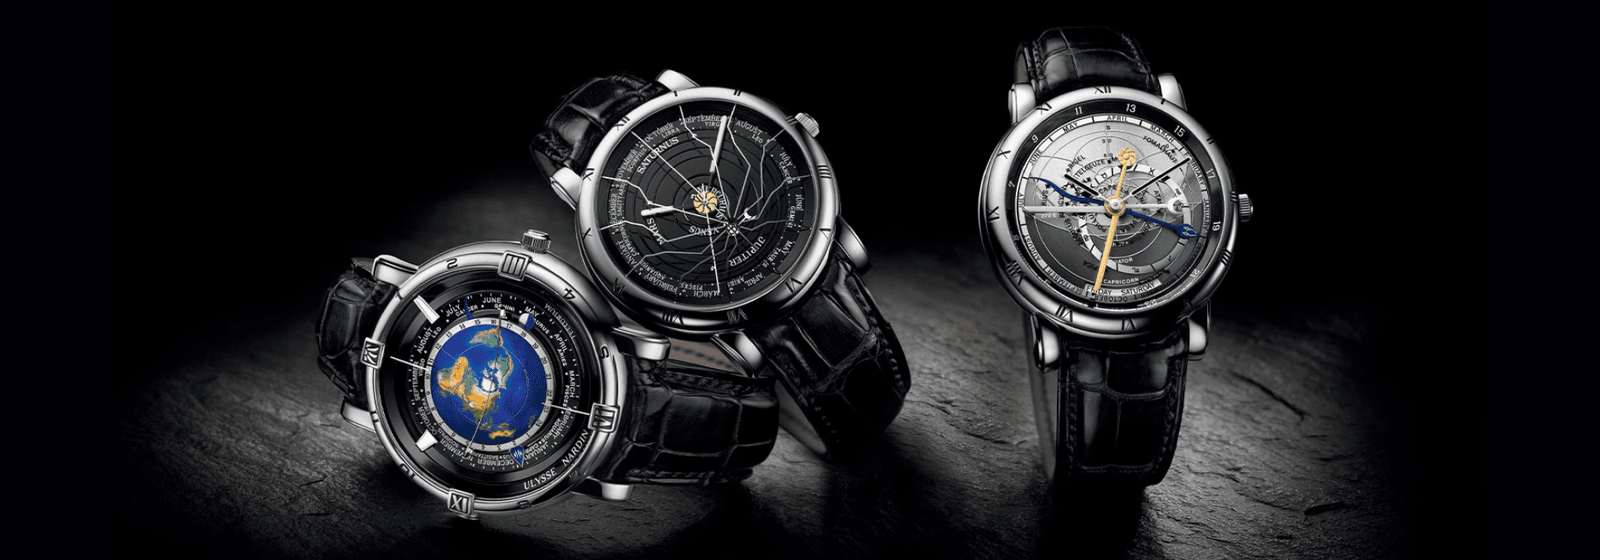 Exploring Unchartered Territory With Ulysse Nardin’s Marine, Blast, And Diver Collection